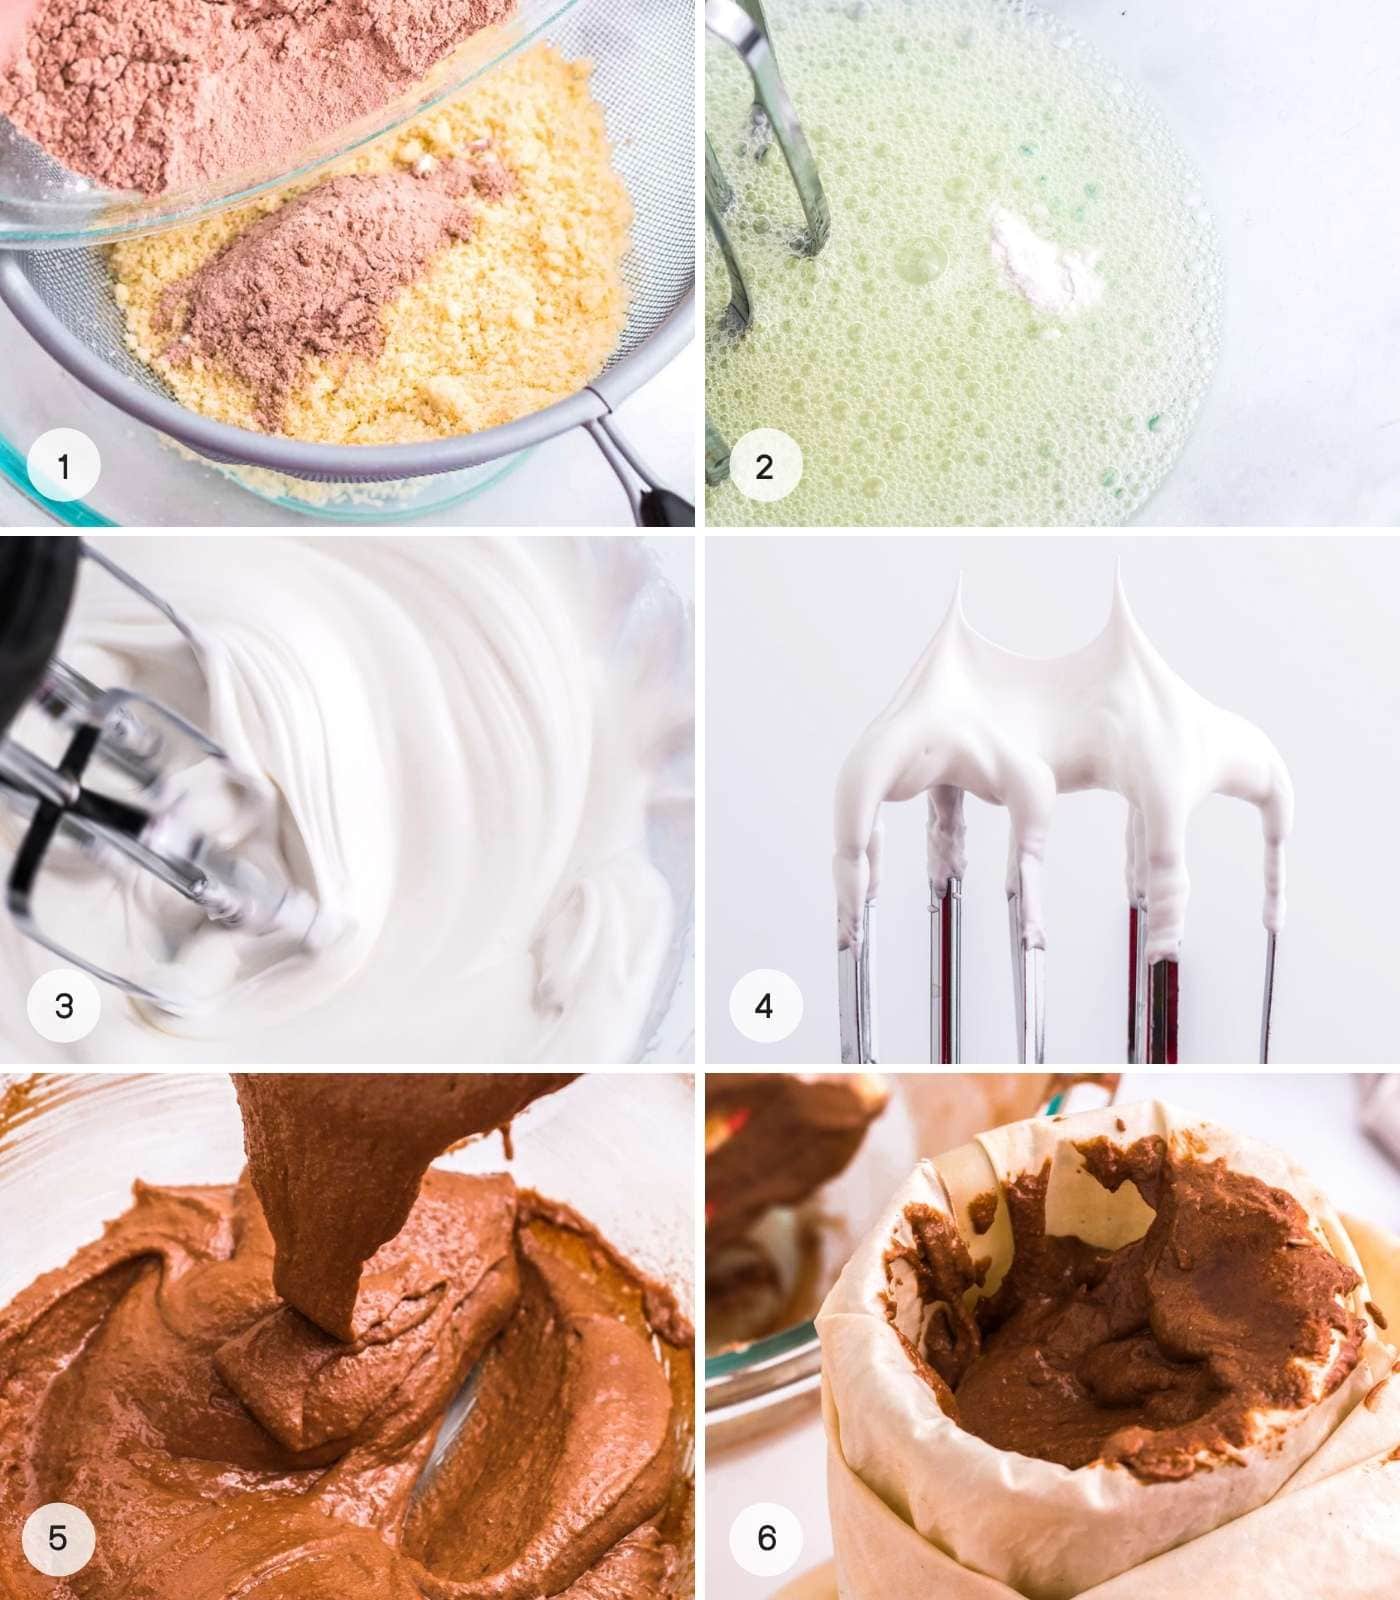 A collage with 6 images showing how to make macarons